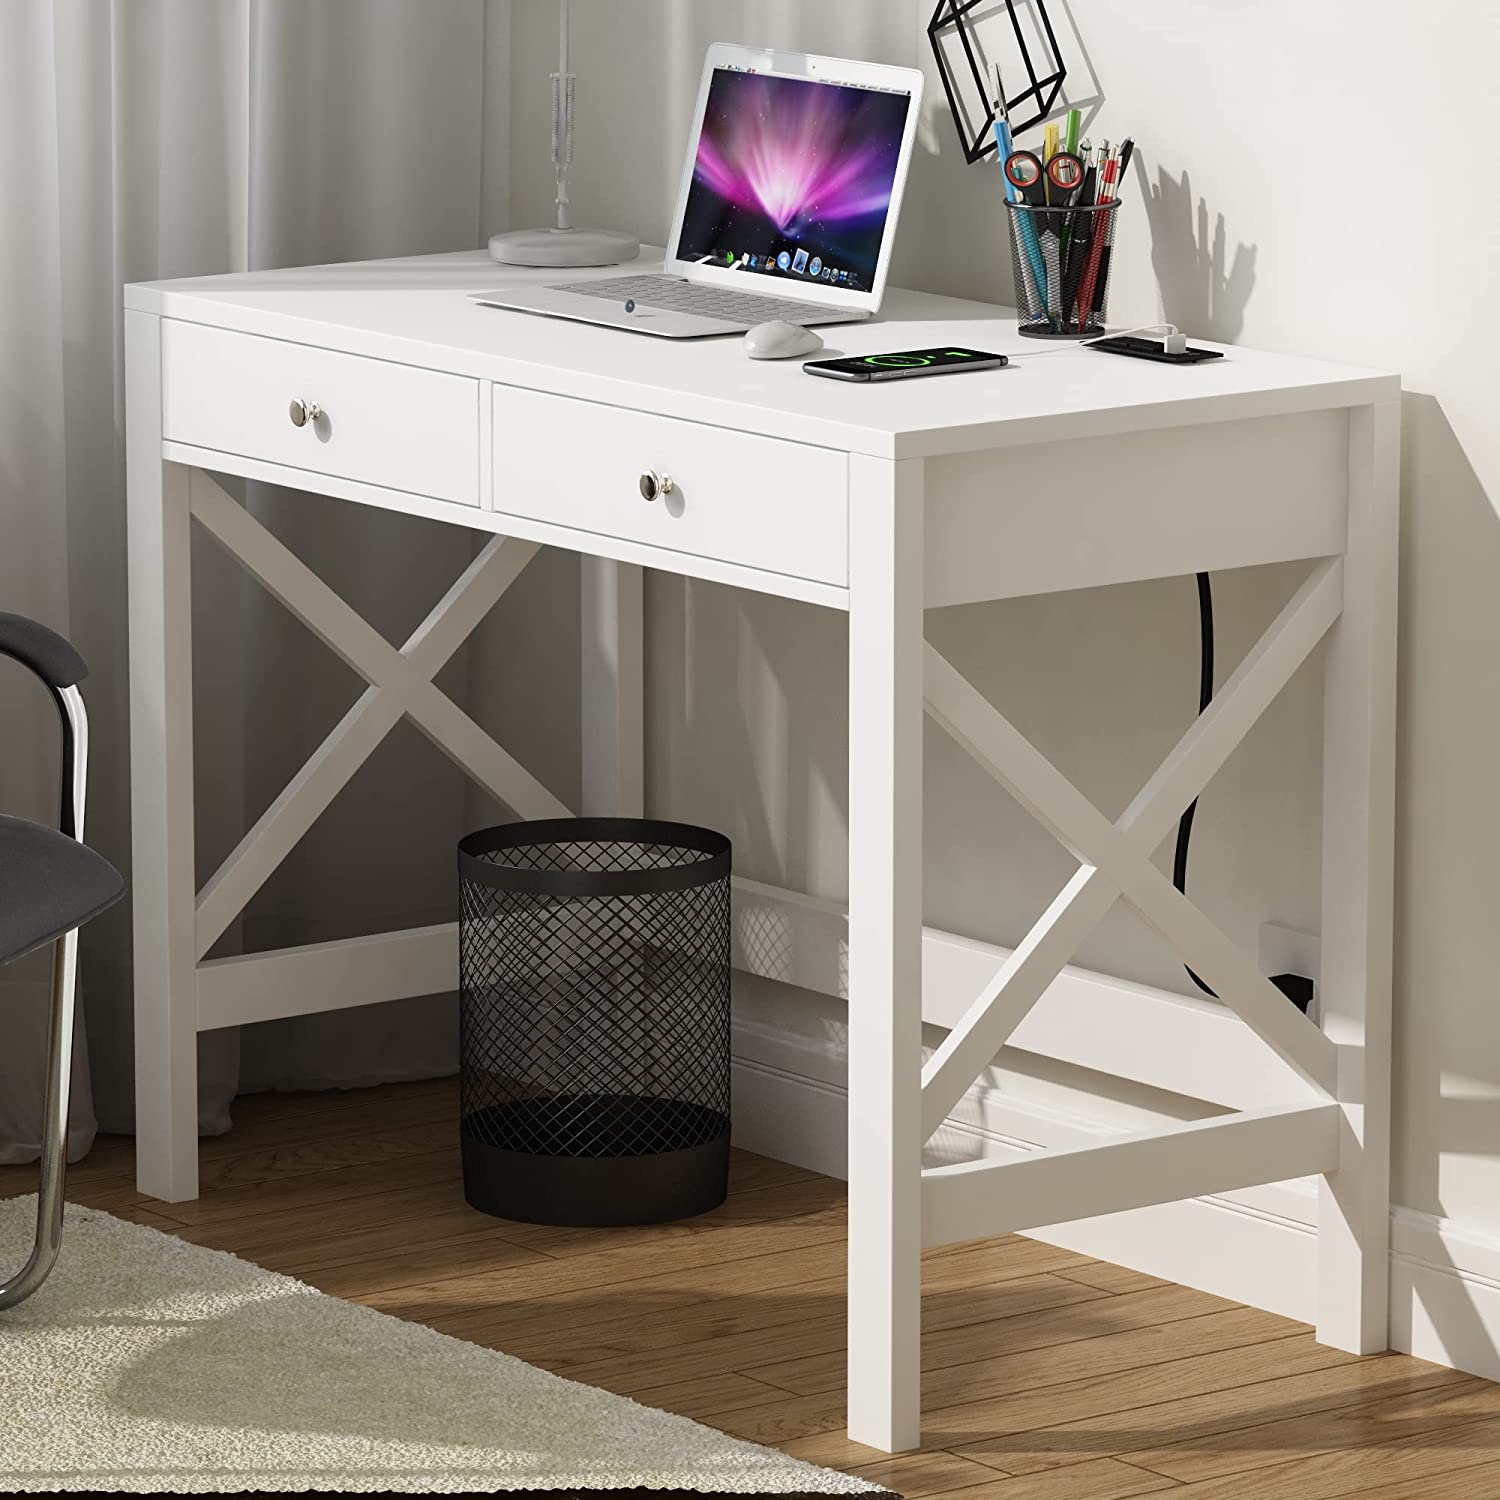 ChooChoo Computer Desk with USB Charging Ports and Power Outlets, 39" White Desk with Drawers, Small Study Writing Table with Stable X Frame for Home Office - Airbnb Ambassador